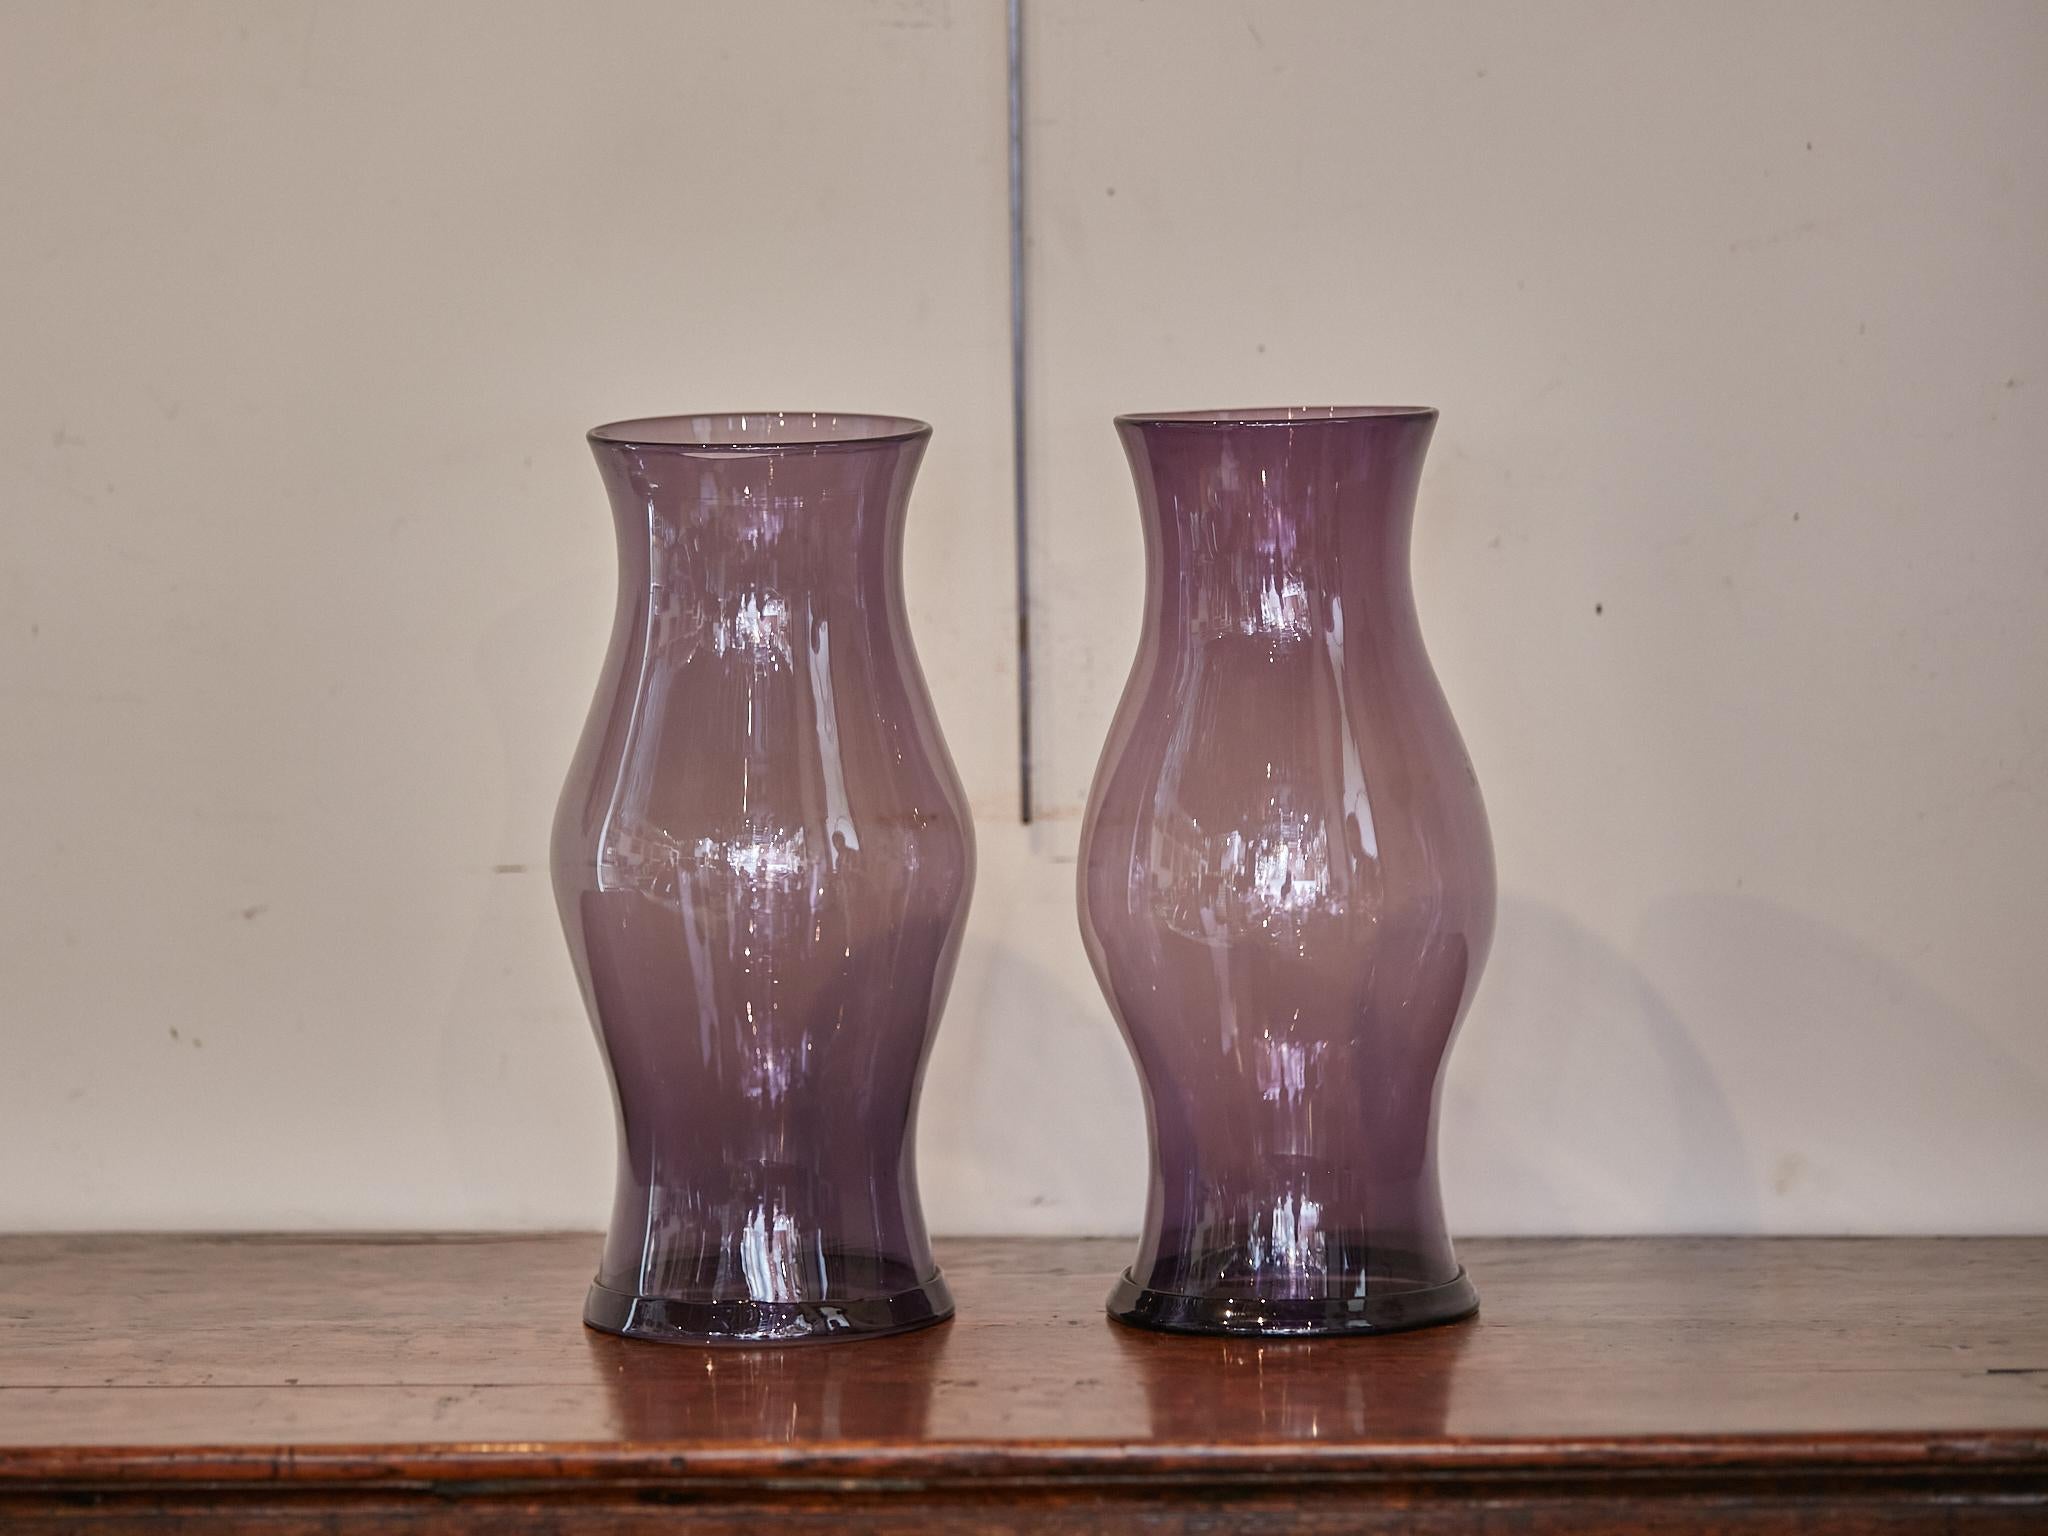 A pair of Midcentury American Amethyst color glass hurricane lamp shades. Evoke a sense of Midcentury magic in your home with this exquisite pair of American Amethyst-colored glass hurricane lamp shades. Radiating with a rich purple hue reminiscent